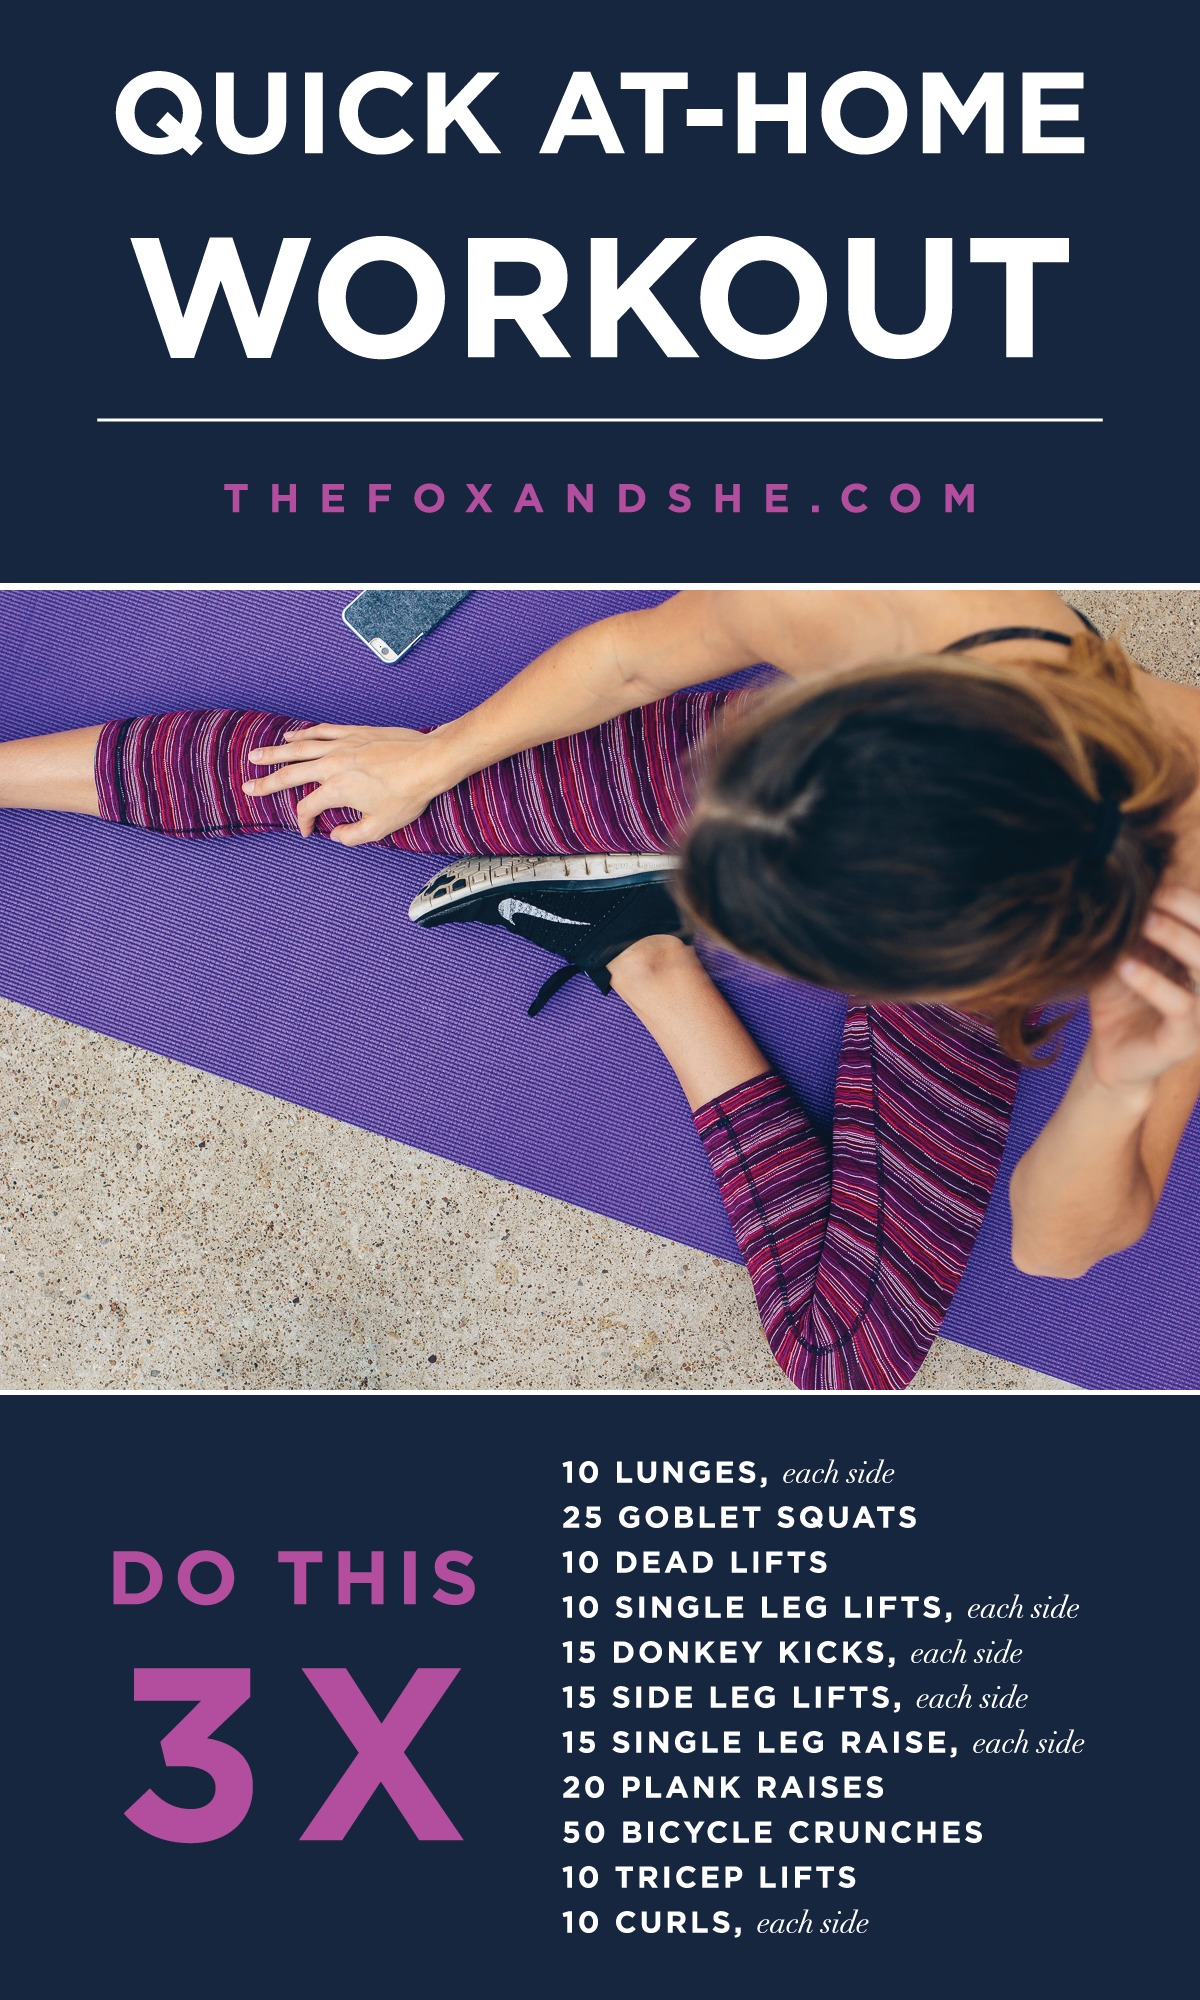 quick at home workout — via @TheFoxandShe